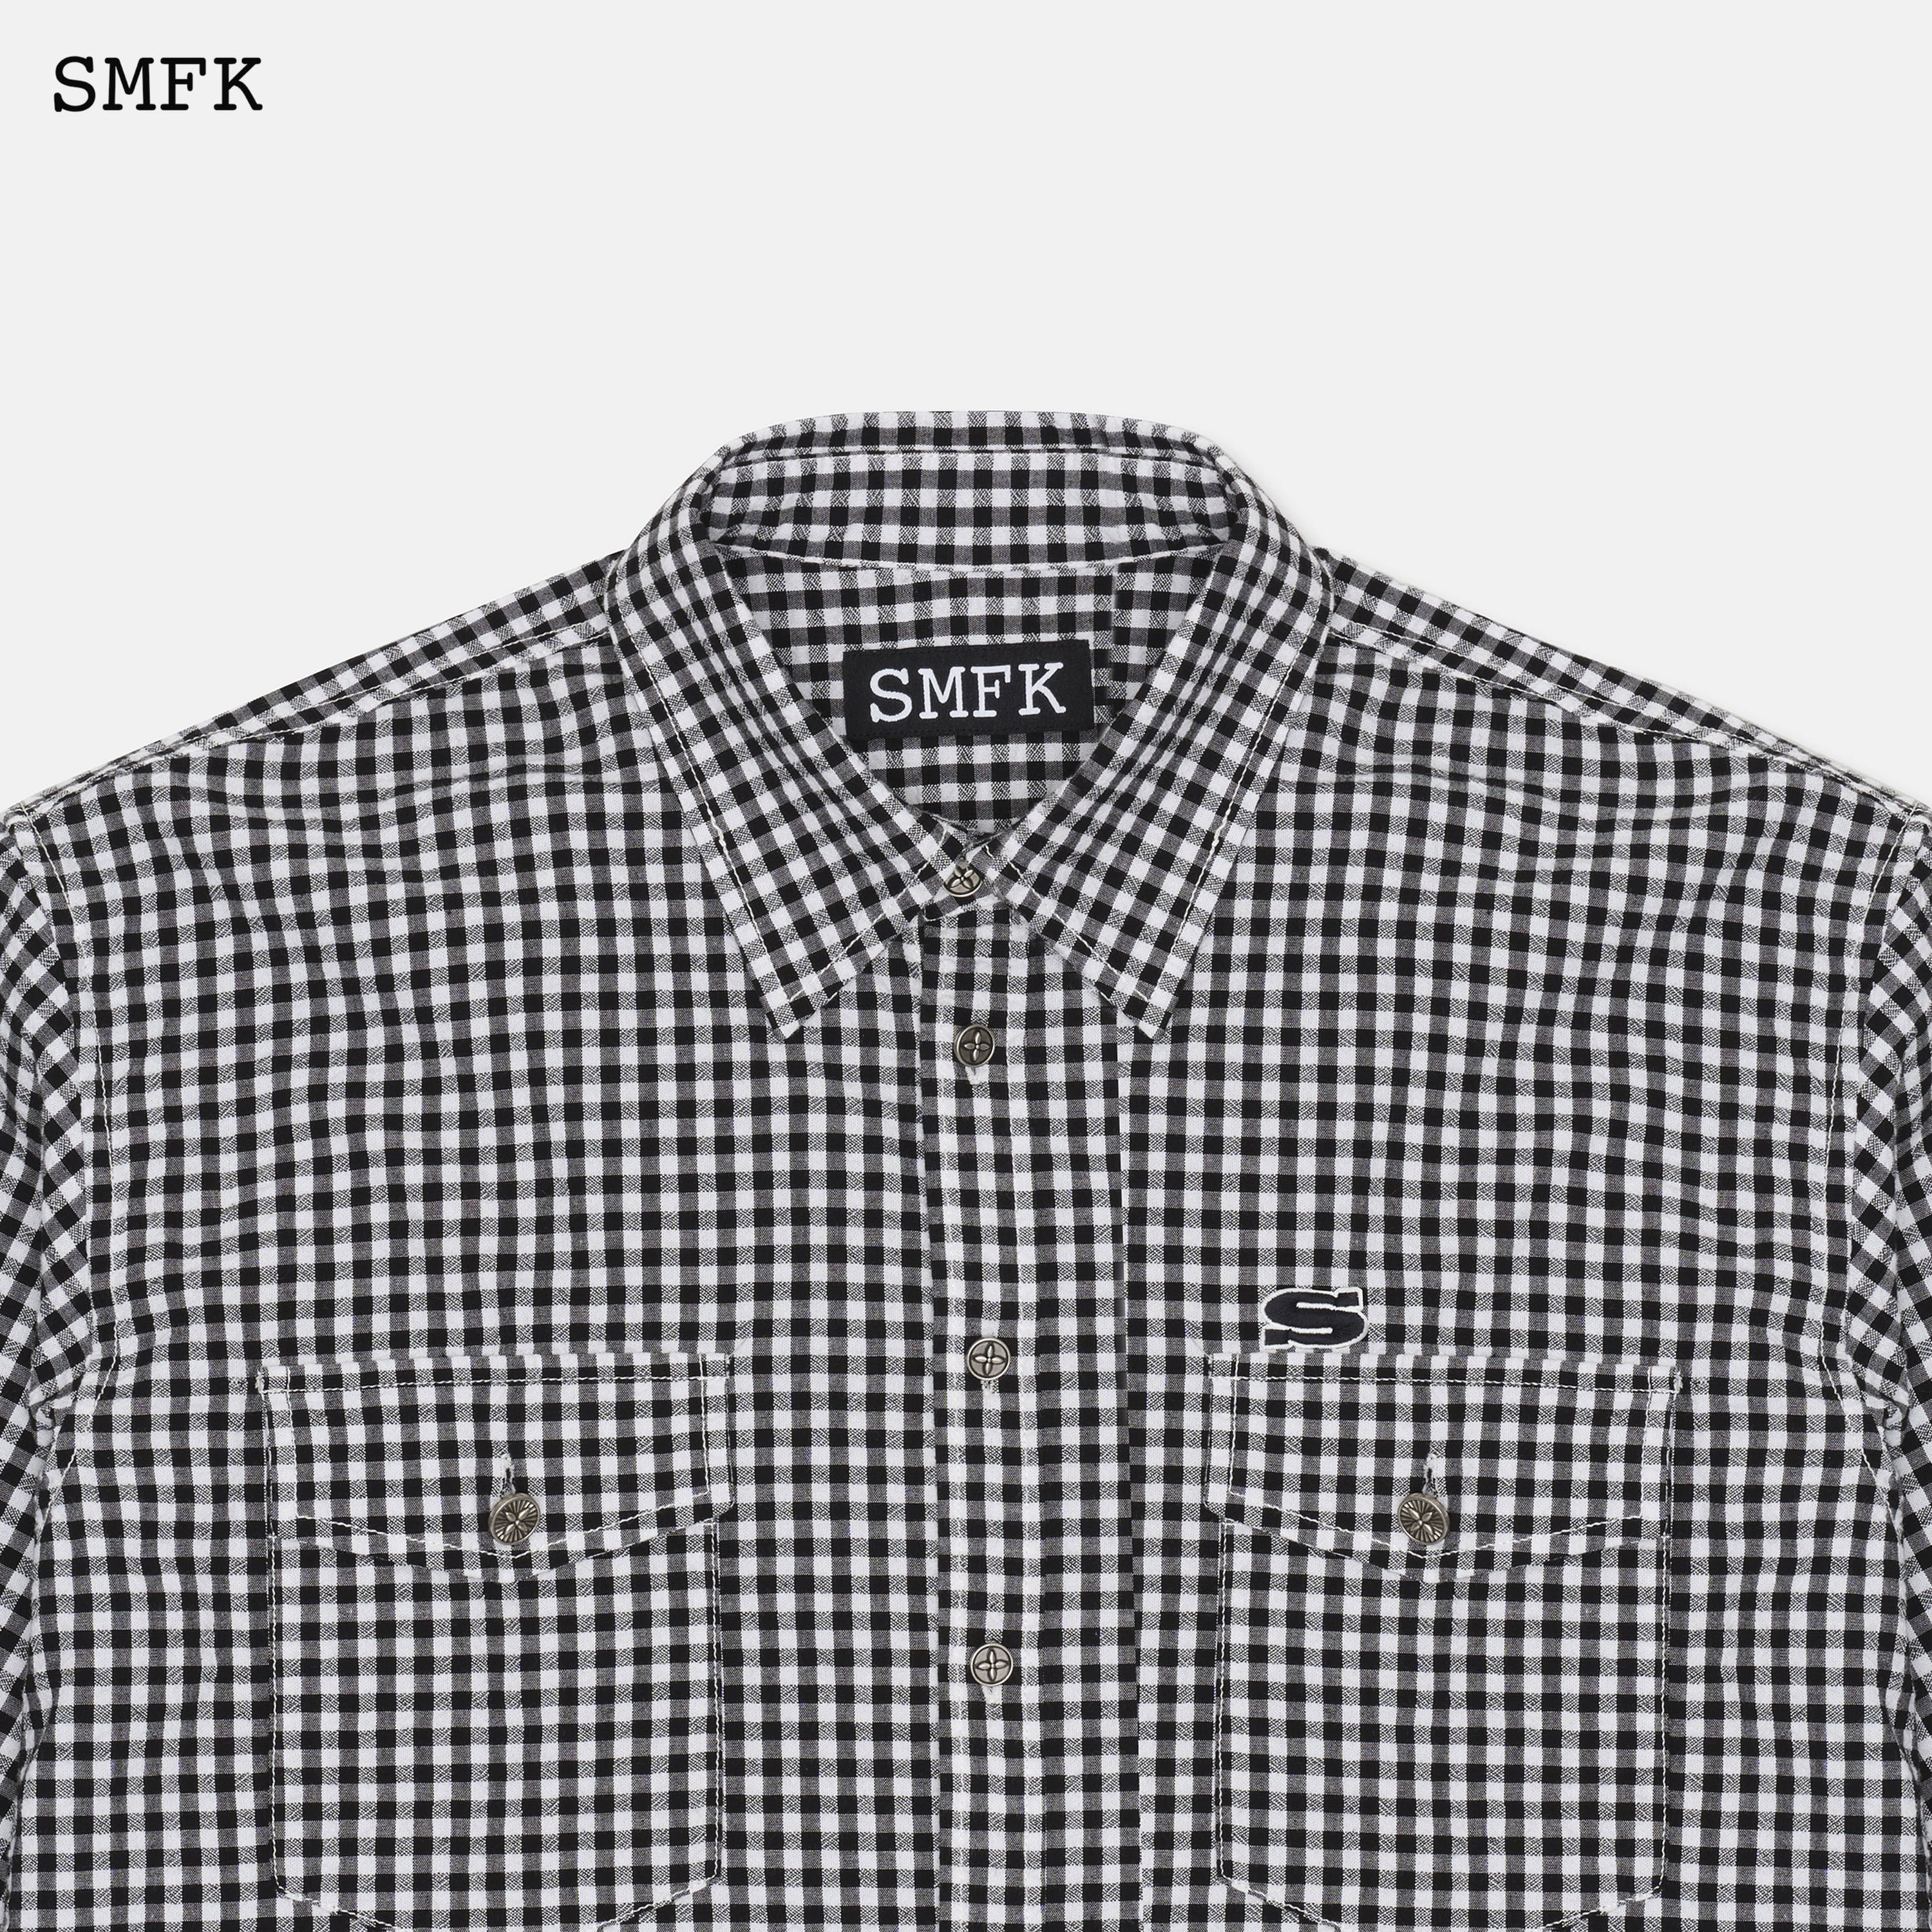 Vintage Academy Black And White Checkered Shirt - SMFK Official